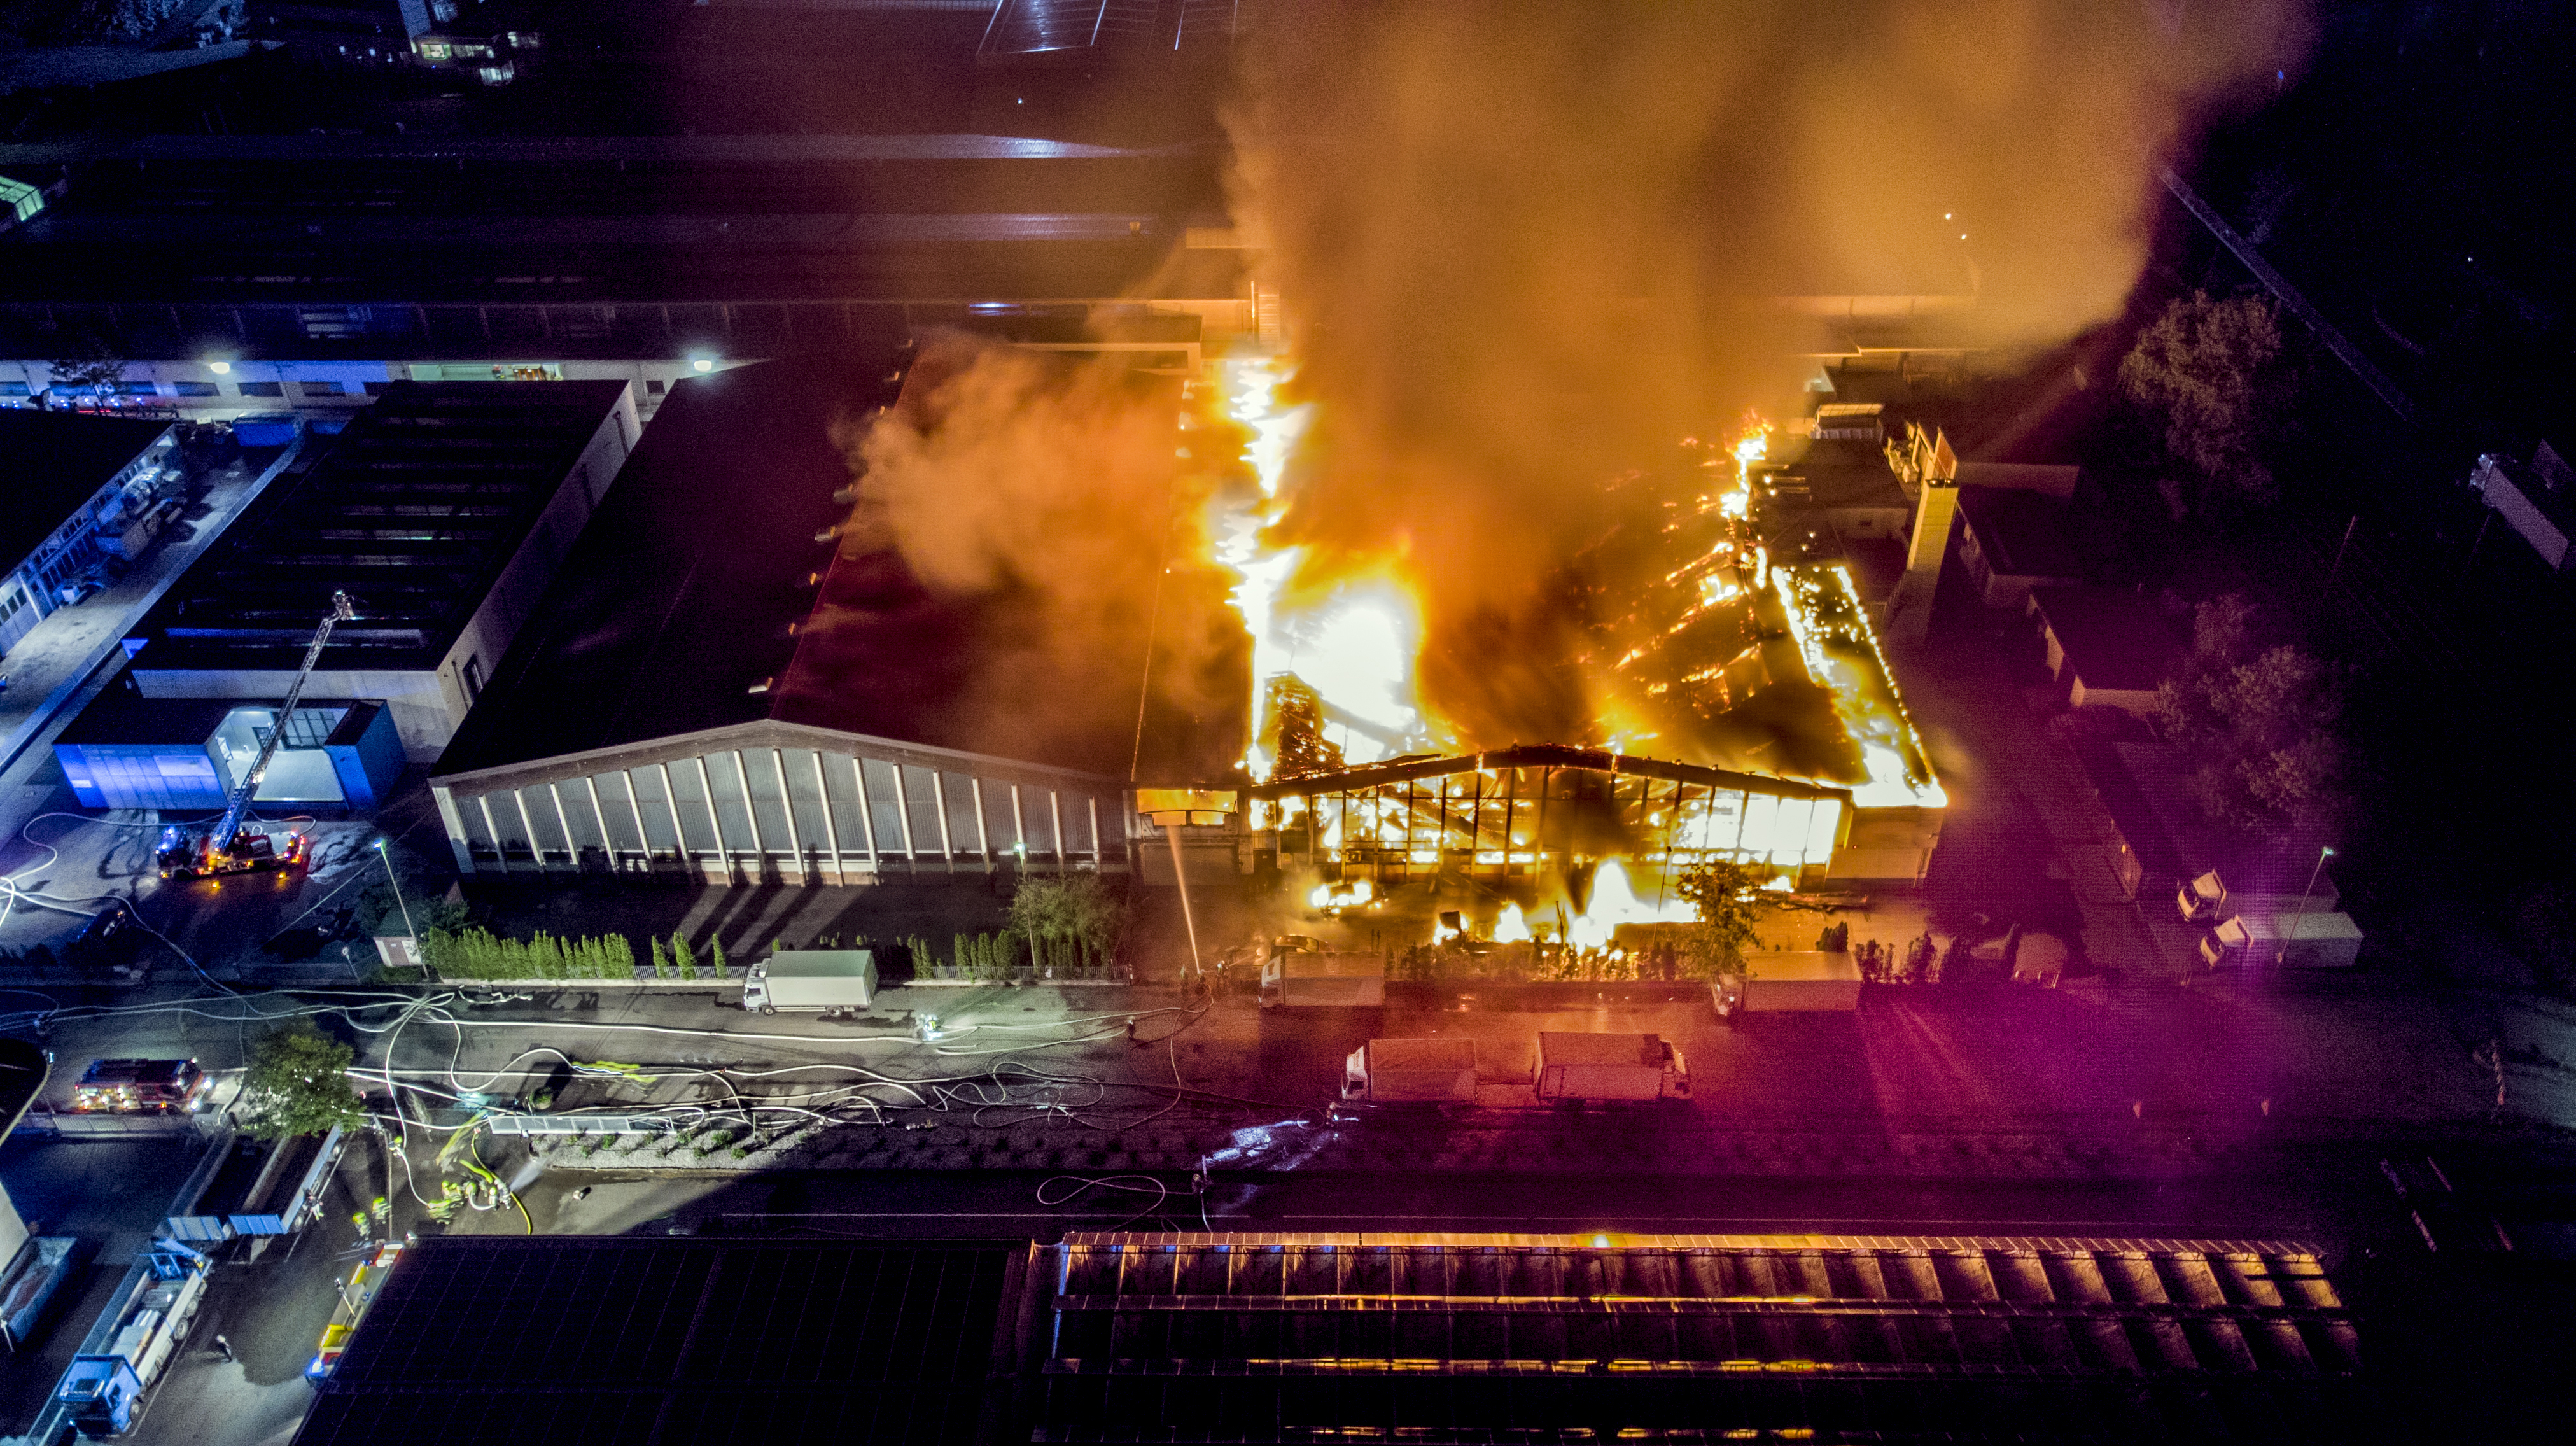 Aerial view a infernal fire in an industrial factory with big flame and smoke above the zone at night. Firemen in action to extinguish the fire in the warehouse zone.; Shutterstock ID 1101013130; purchase_order: NA; job: RICS Property Journal Jan22; client: RICS; other: 